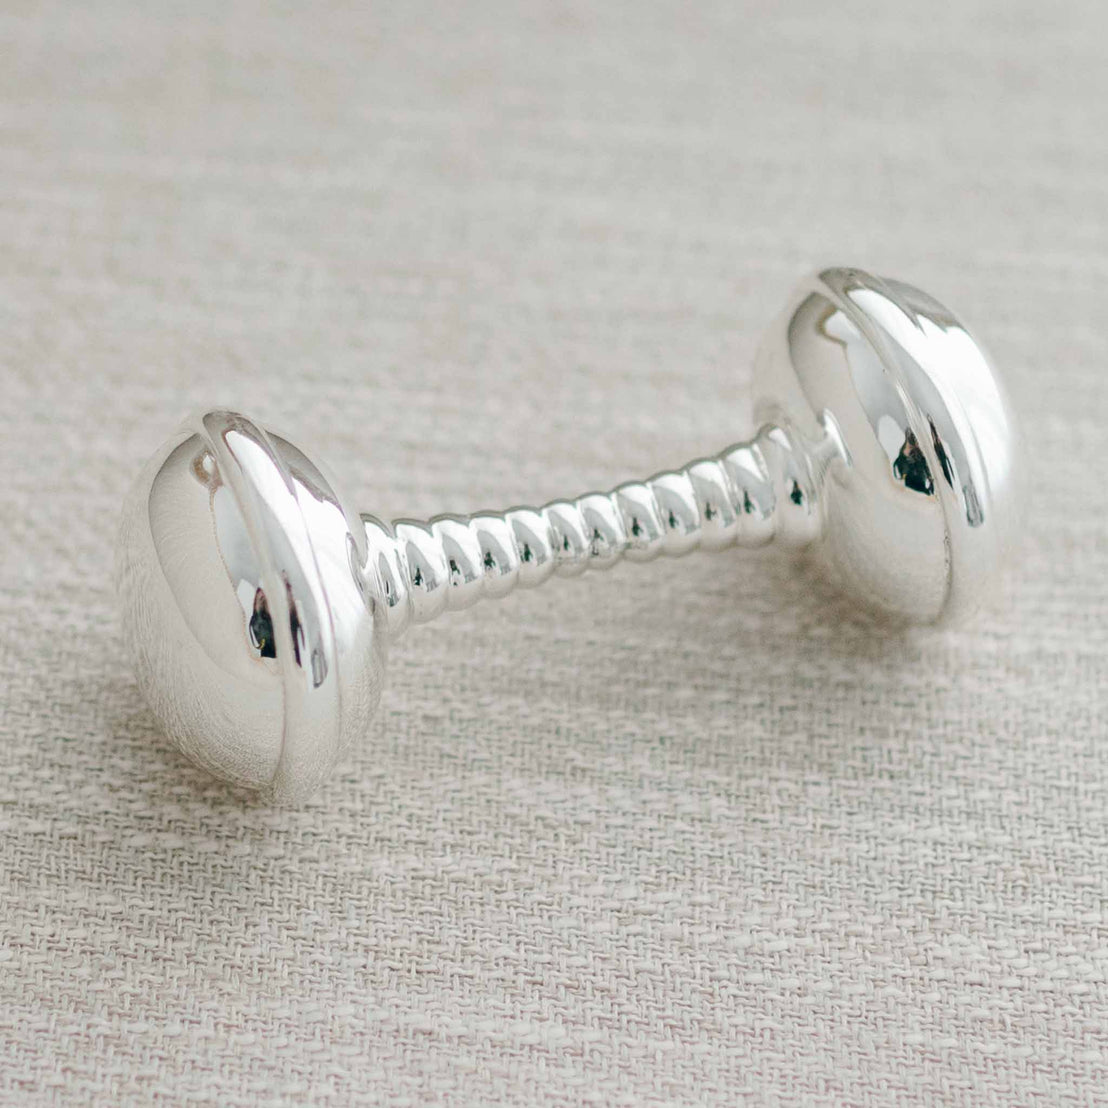 A luxury vintage Silver Baby Rattle with two rounded ends and a twisted handle, lying on a textured beige fabric.